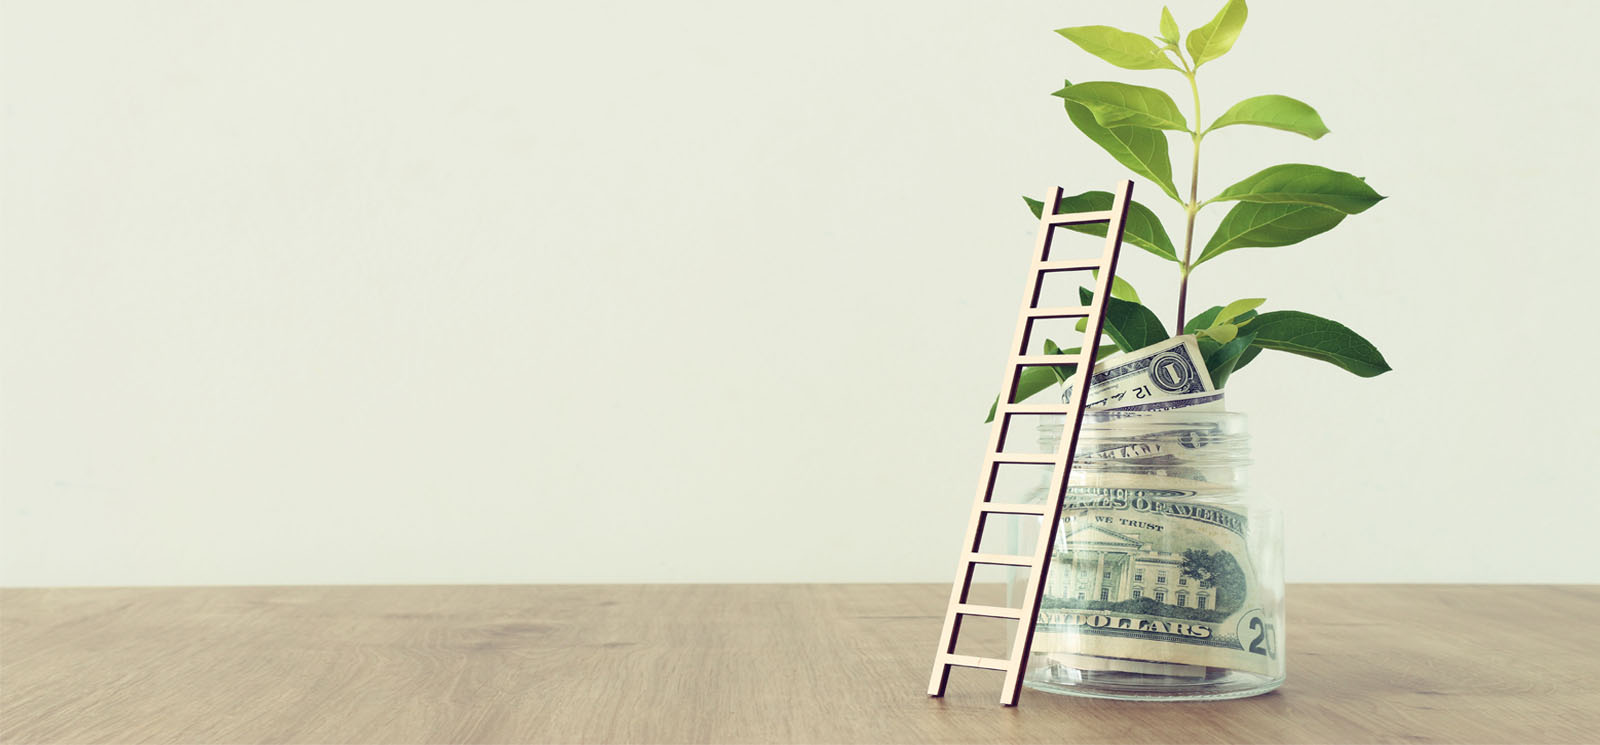 Image of a savings jar and ladder. Money investment and financial growth concept.